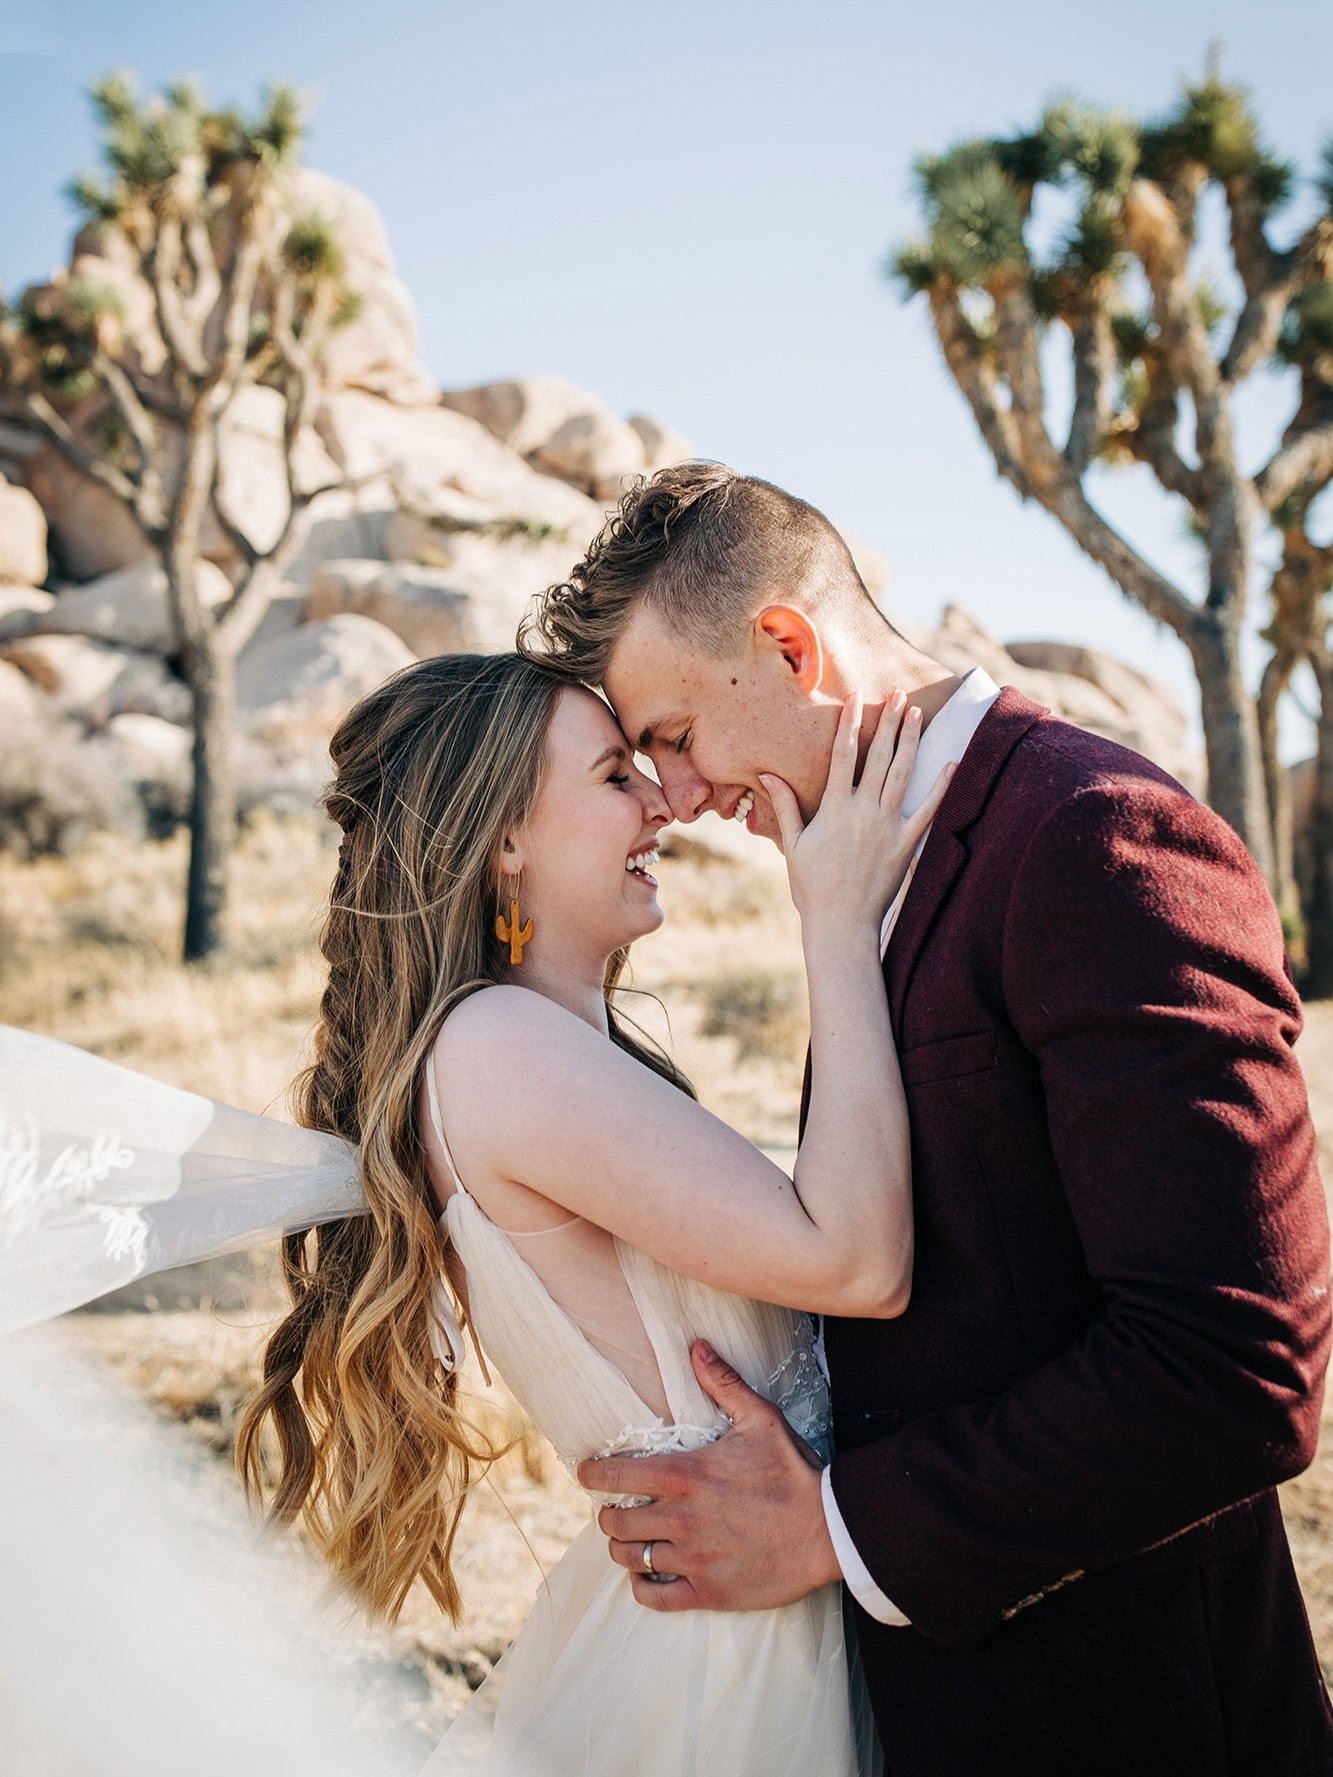 how-to-elope-in-joshua-tree-national-park-5.jpg